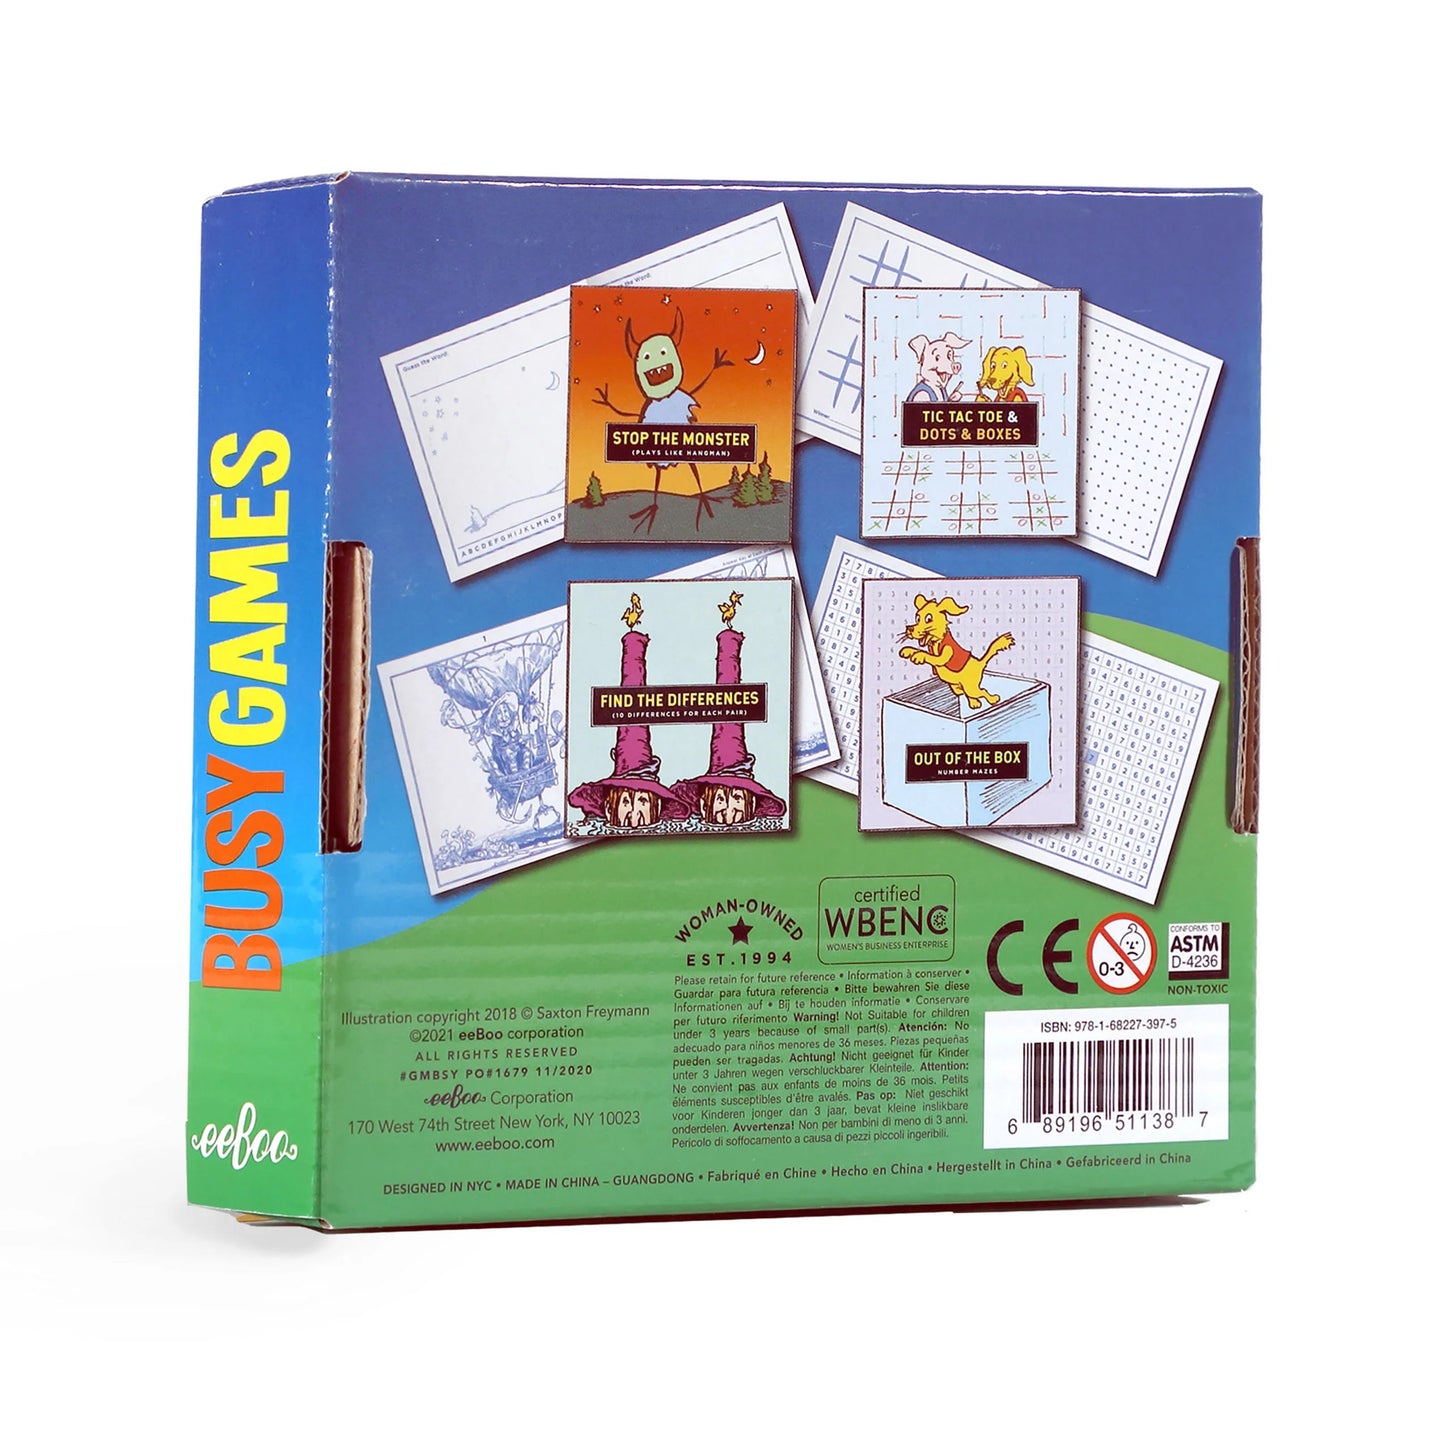 Busy Games Travel Set 196 TOYS CHILD Eeboo 